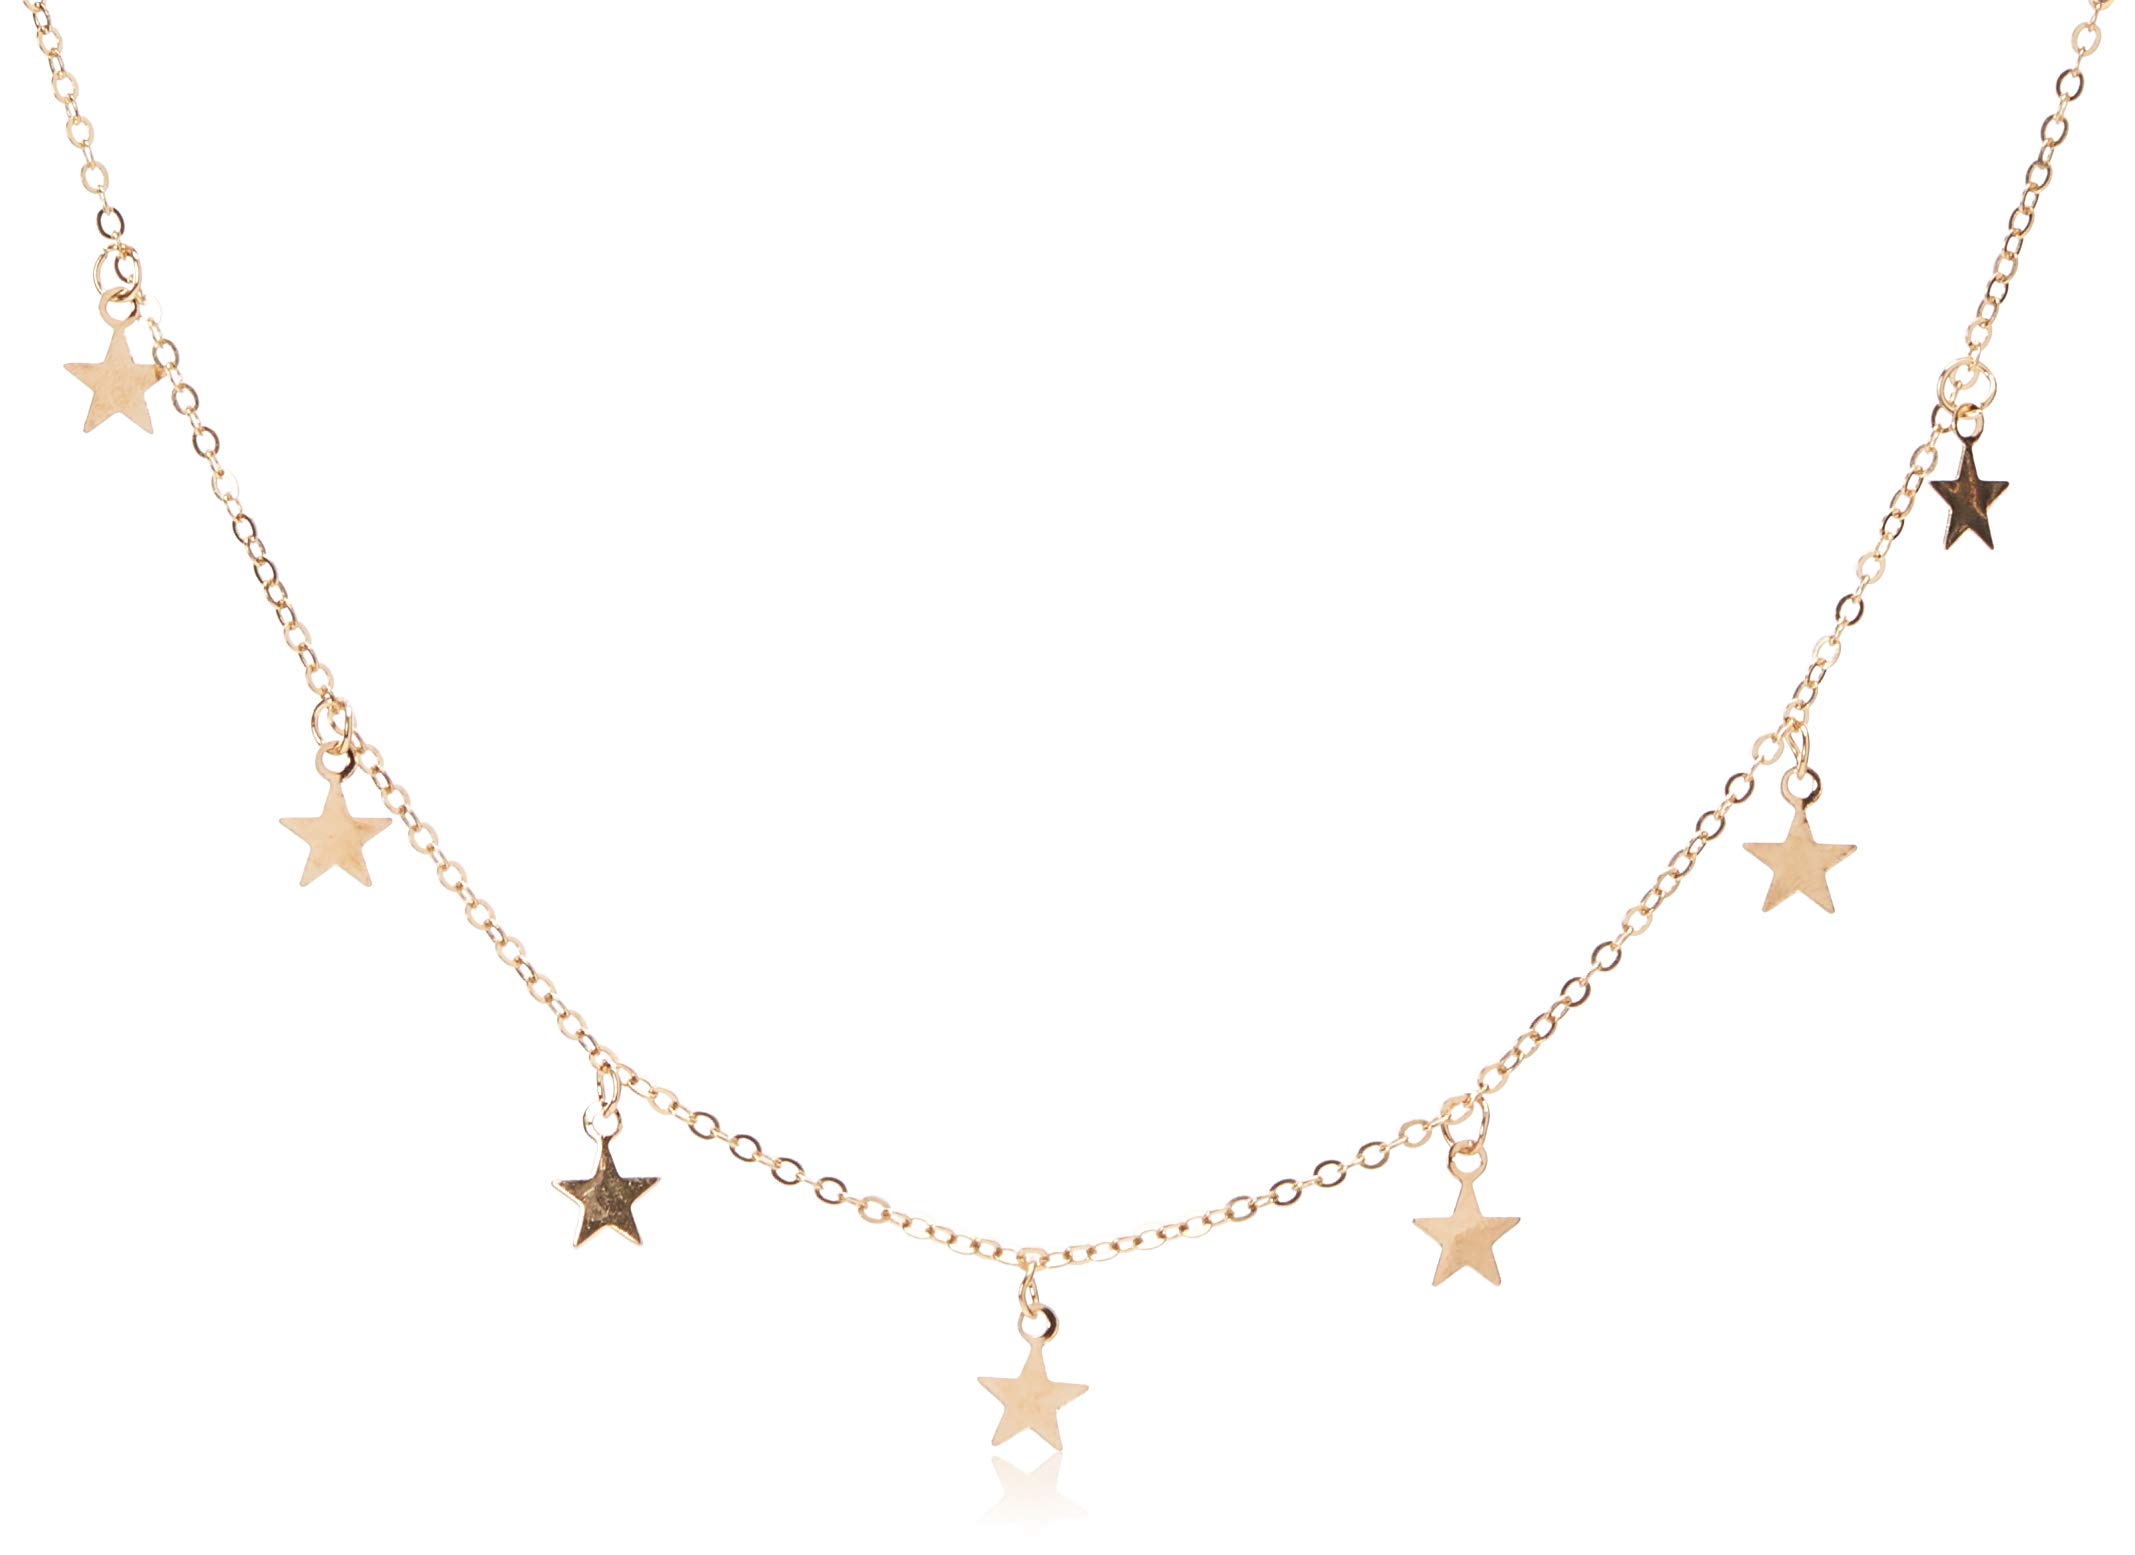 Dolland Lucky Star Choker Necklace Pendant Tassels Chain Statement Necklace for Women Girls,Gold,Adjustable